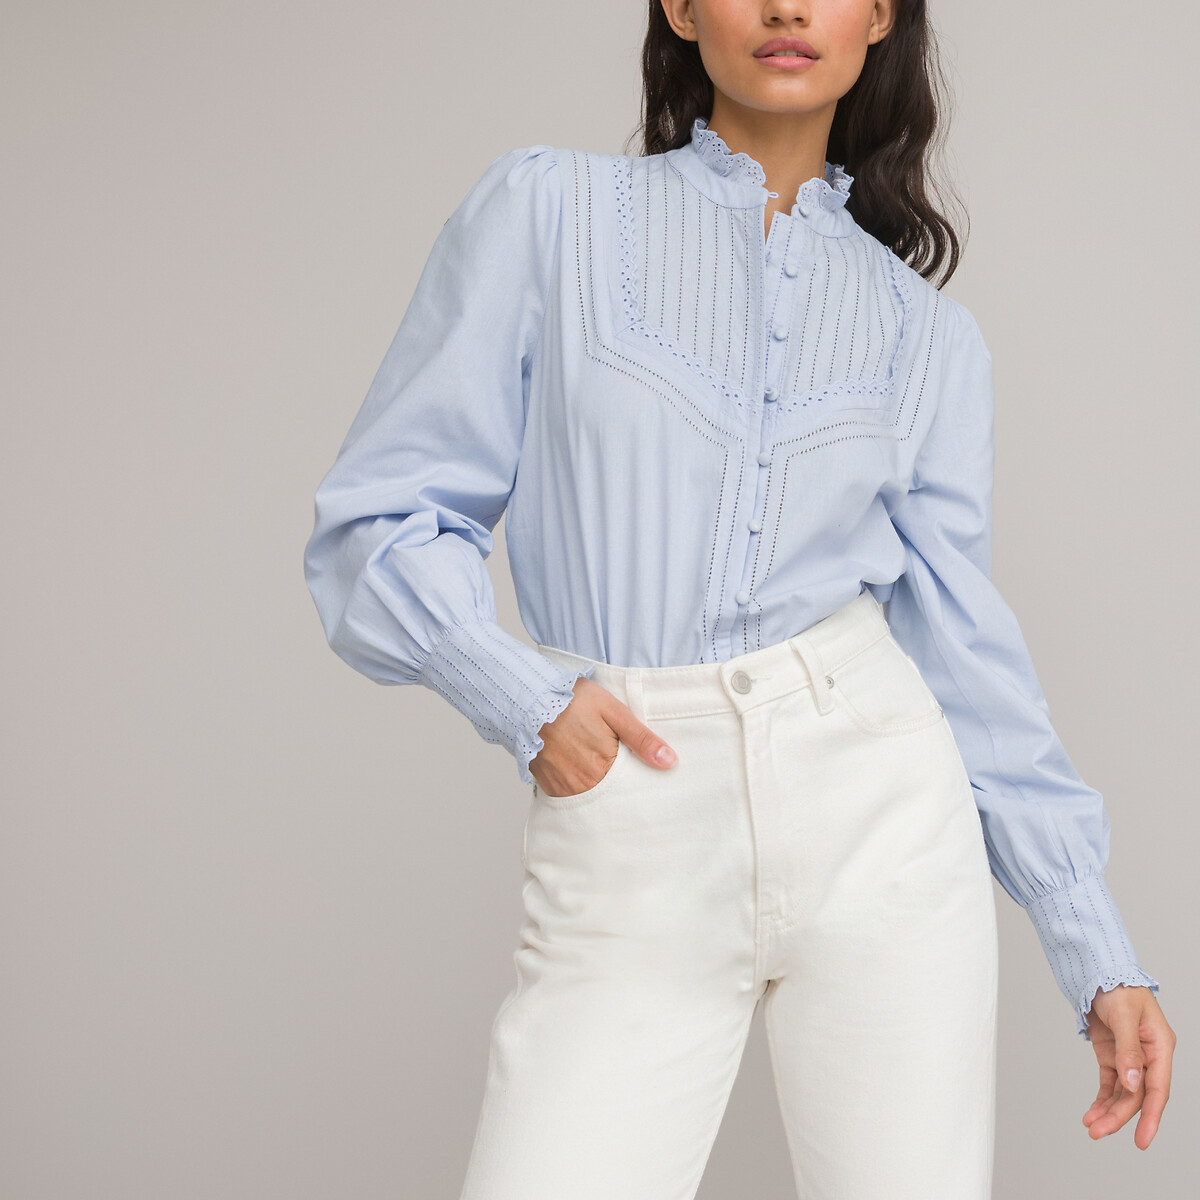 Cotton Ruffled Shirt with High Neck and Long Sleeves